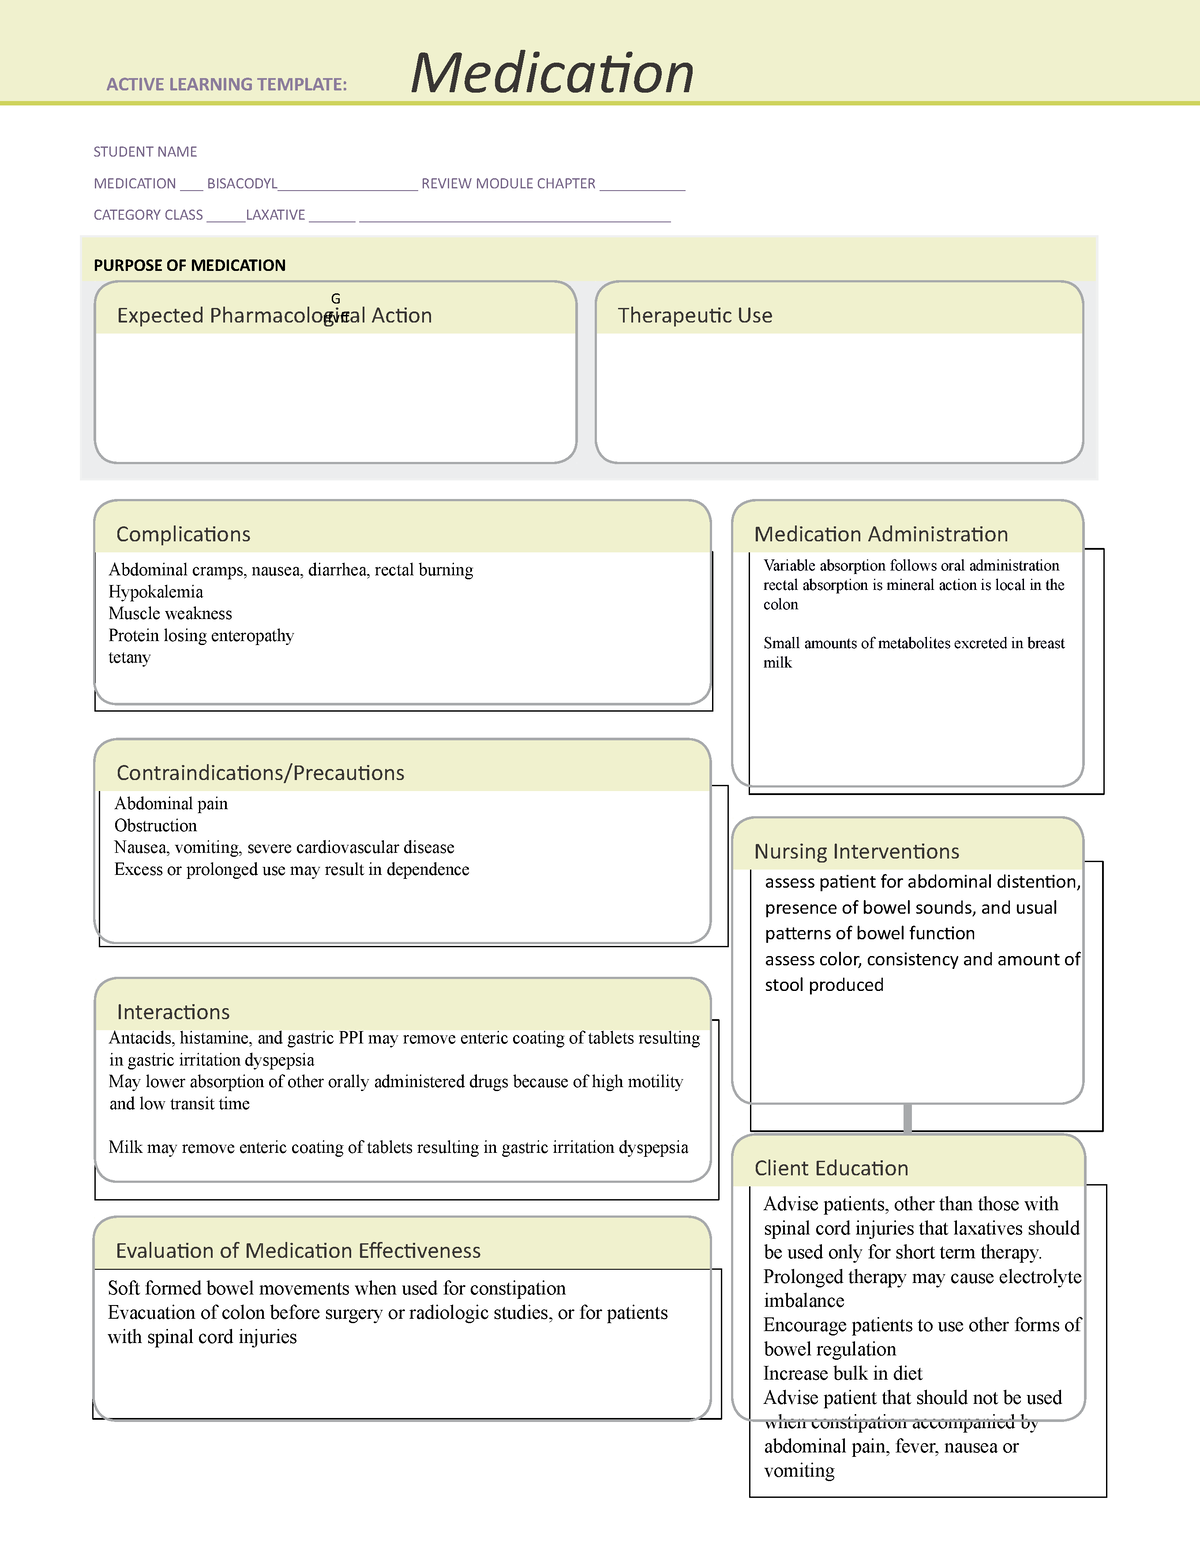 Active Learning Template bisacodyl STUDENT NAME MEDICATION